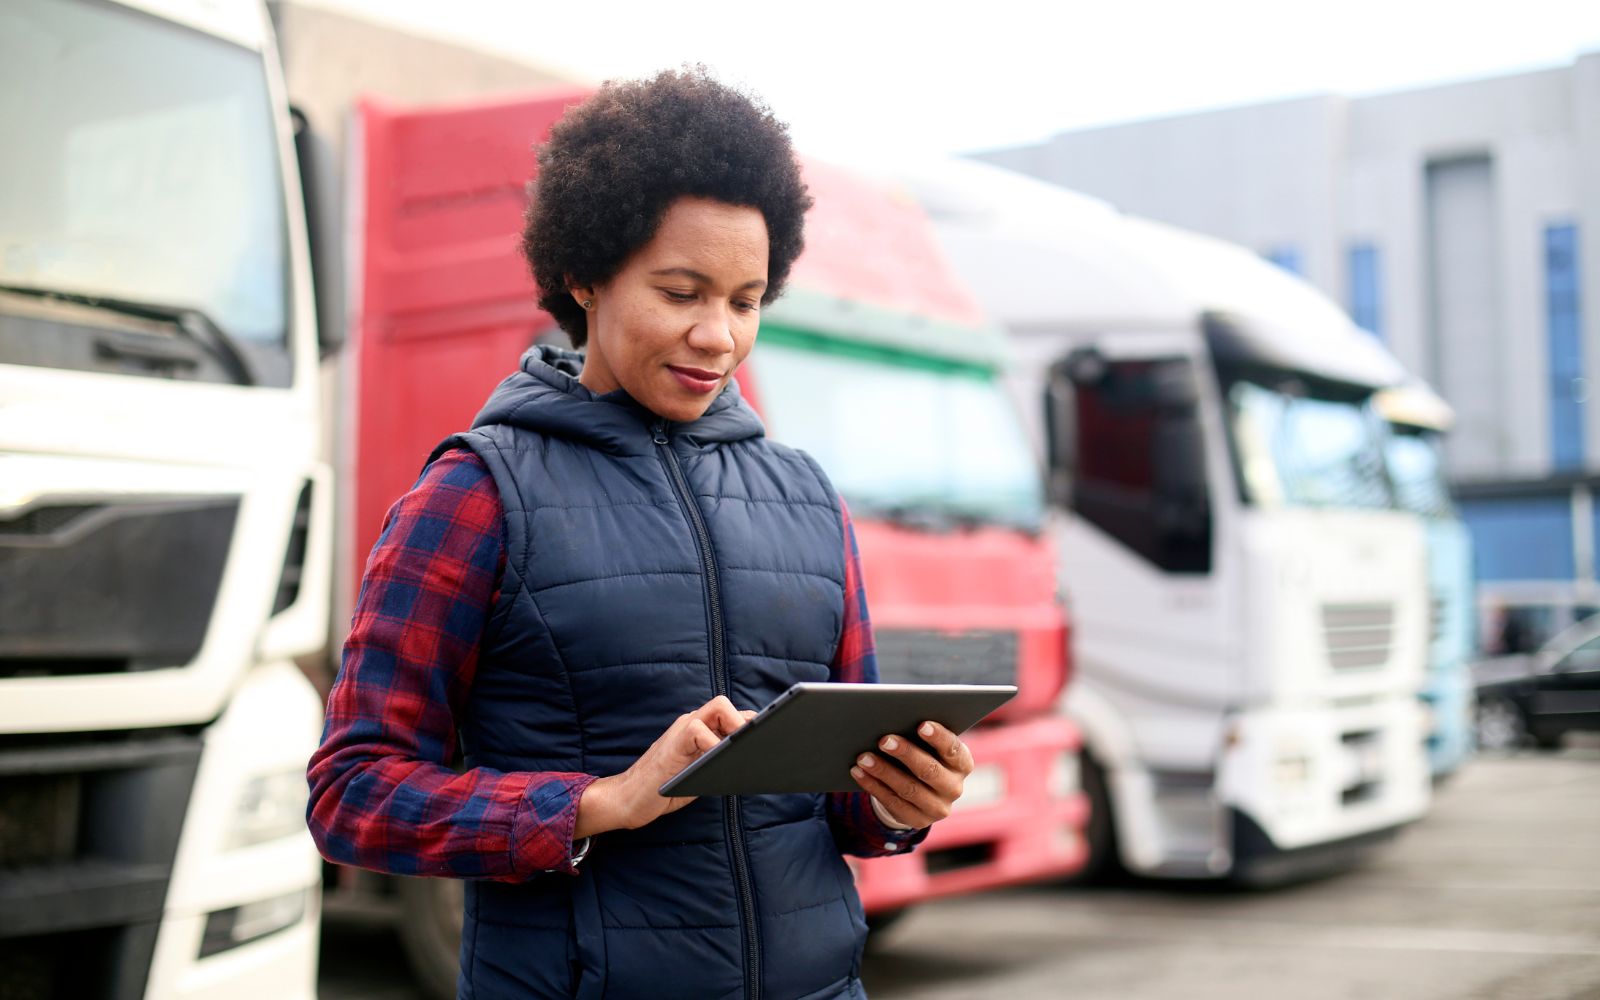 safety tips for female truck drivers means planning out trips ahead of time